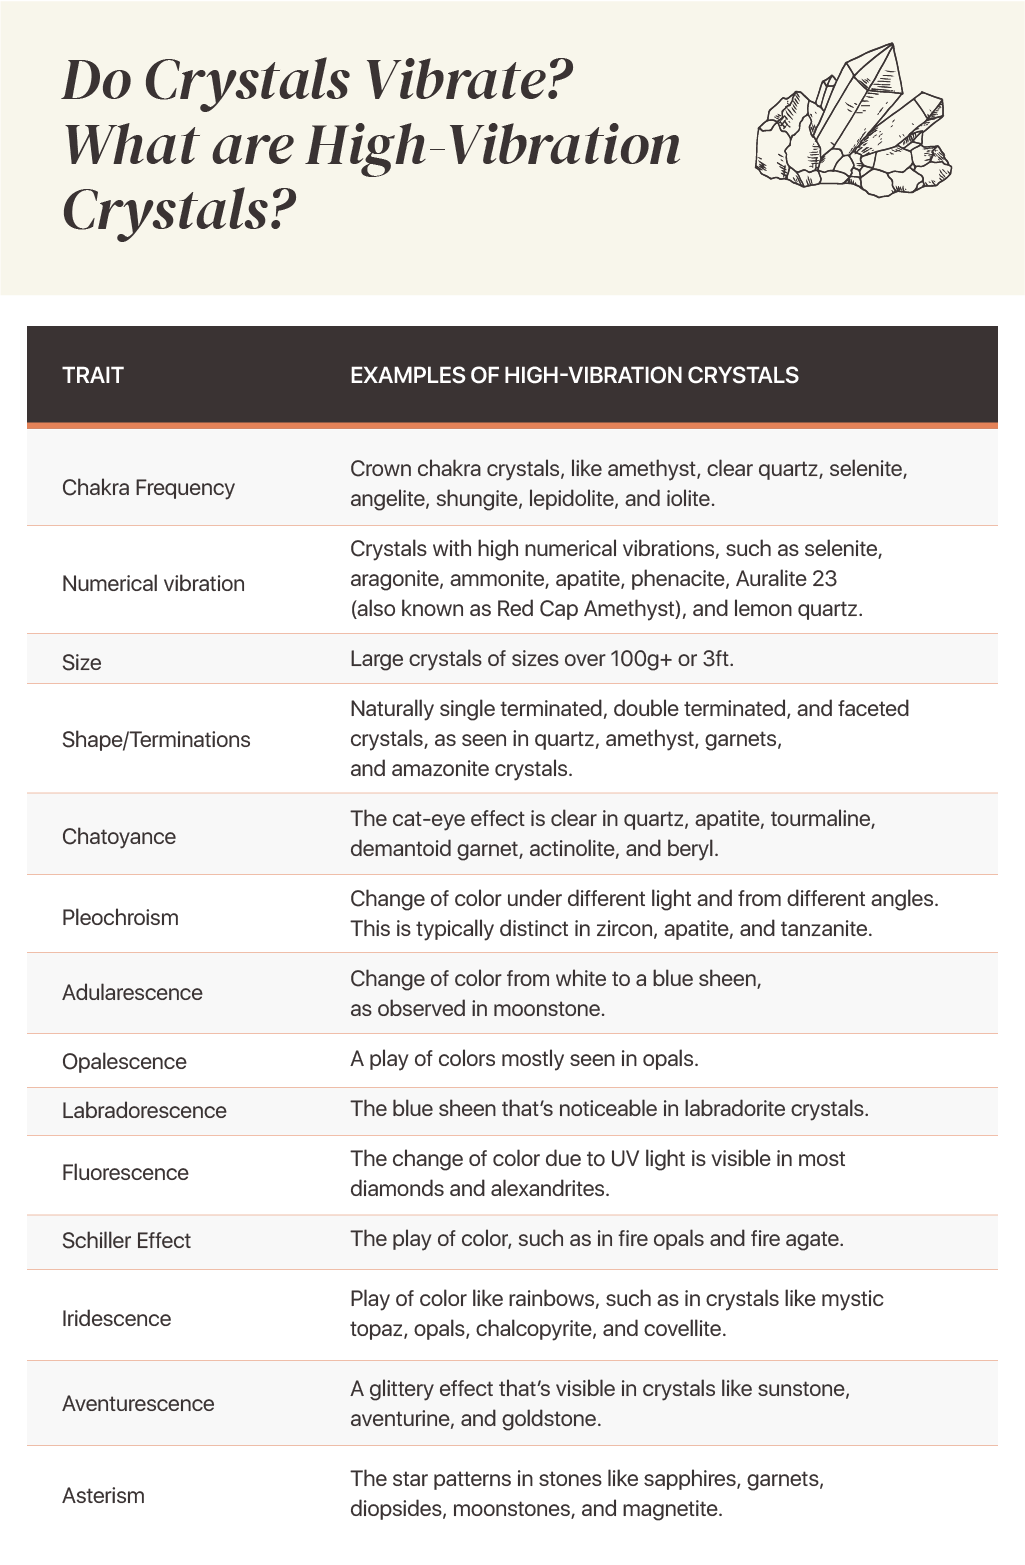 a chart with a list of traits used to identify high-vibration crystals